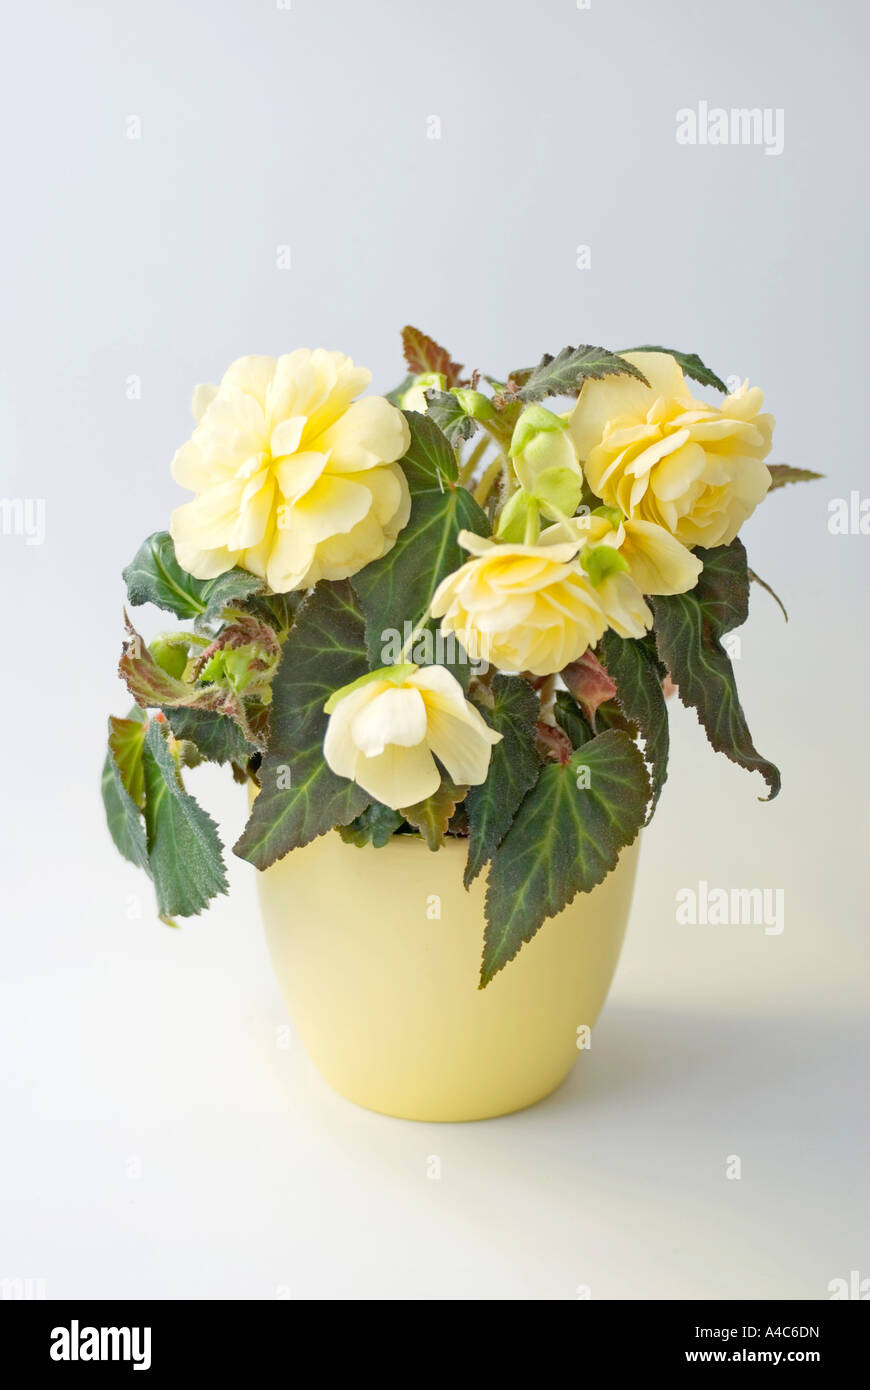 Begonia (Begonia spec), flowering potted plant, studio picture Stock Photo